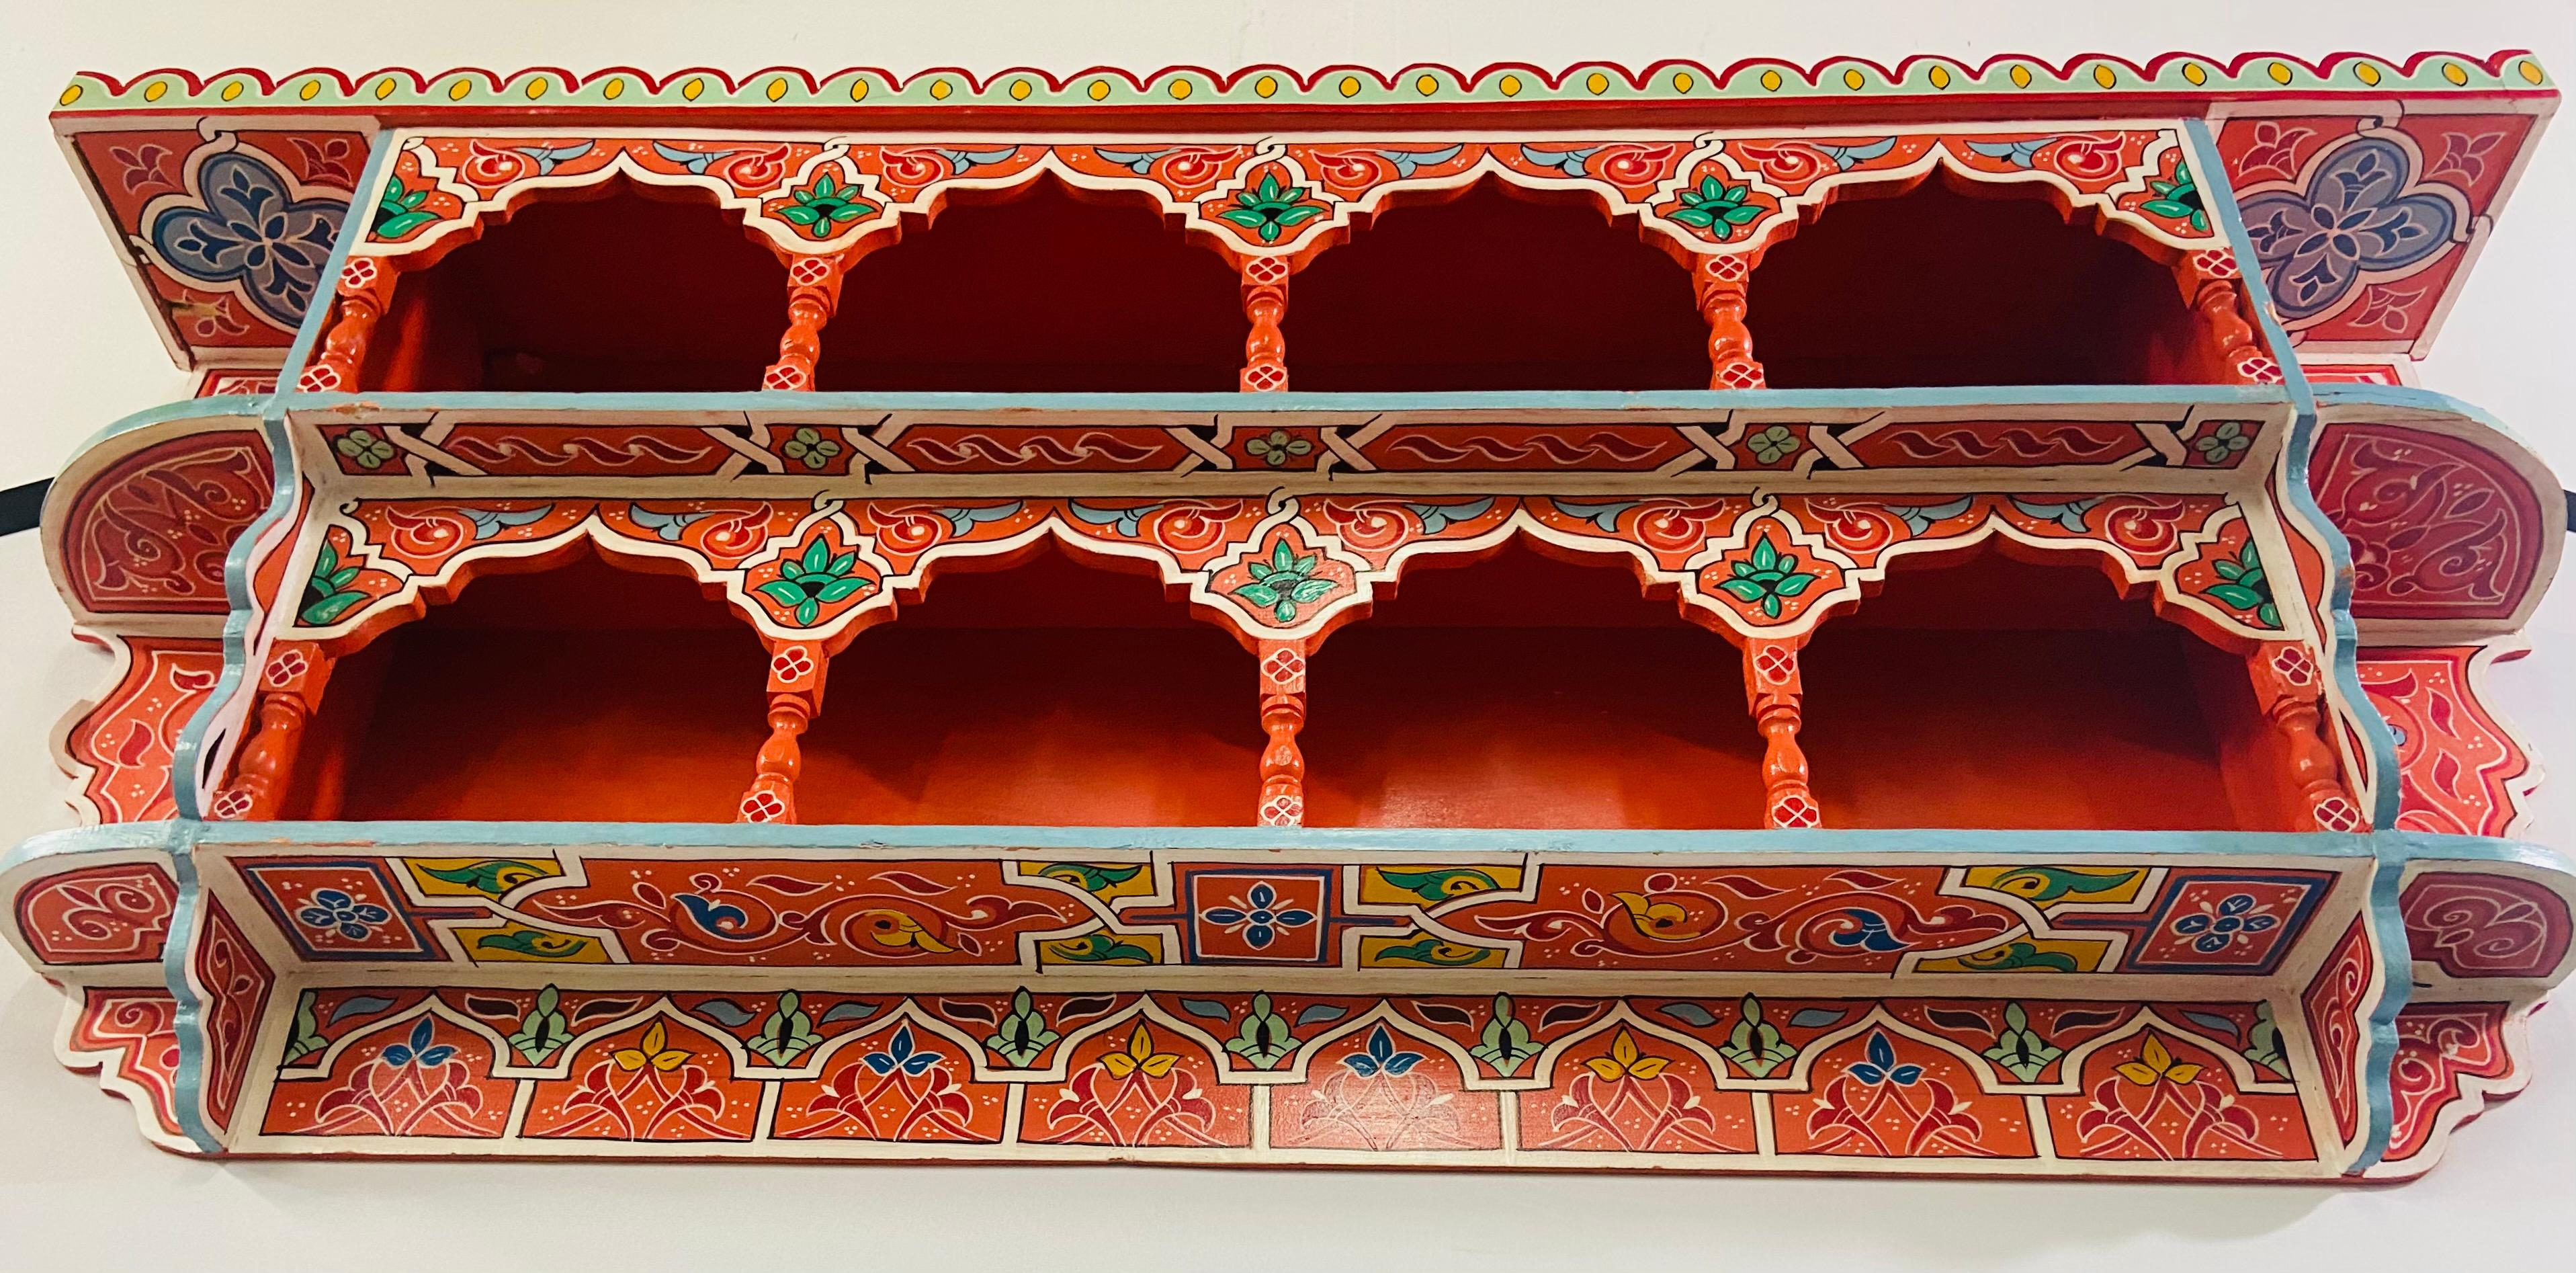 20th Century Vintage Moroccan Hand Painted Wall Shelf or Spice Rack